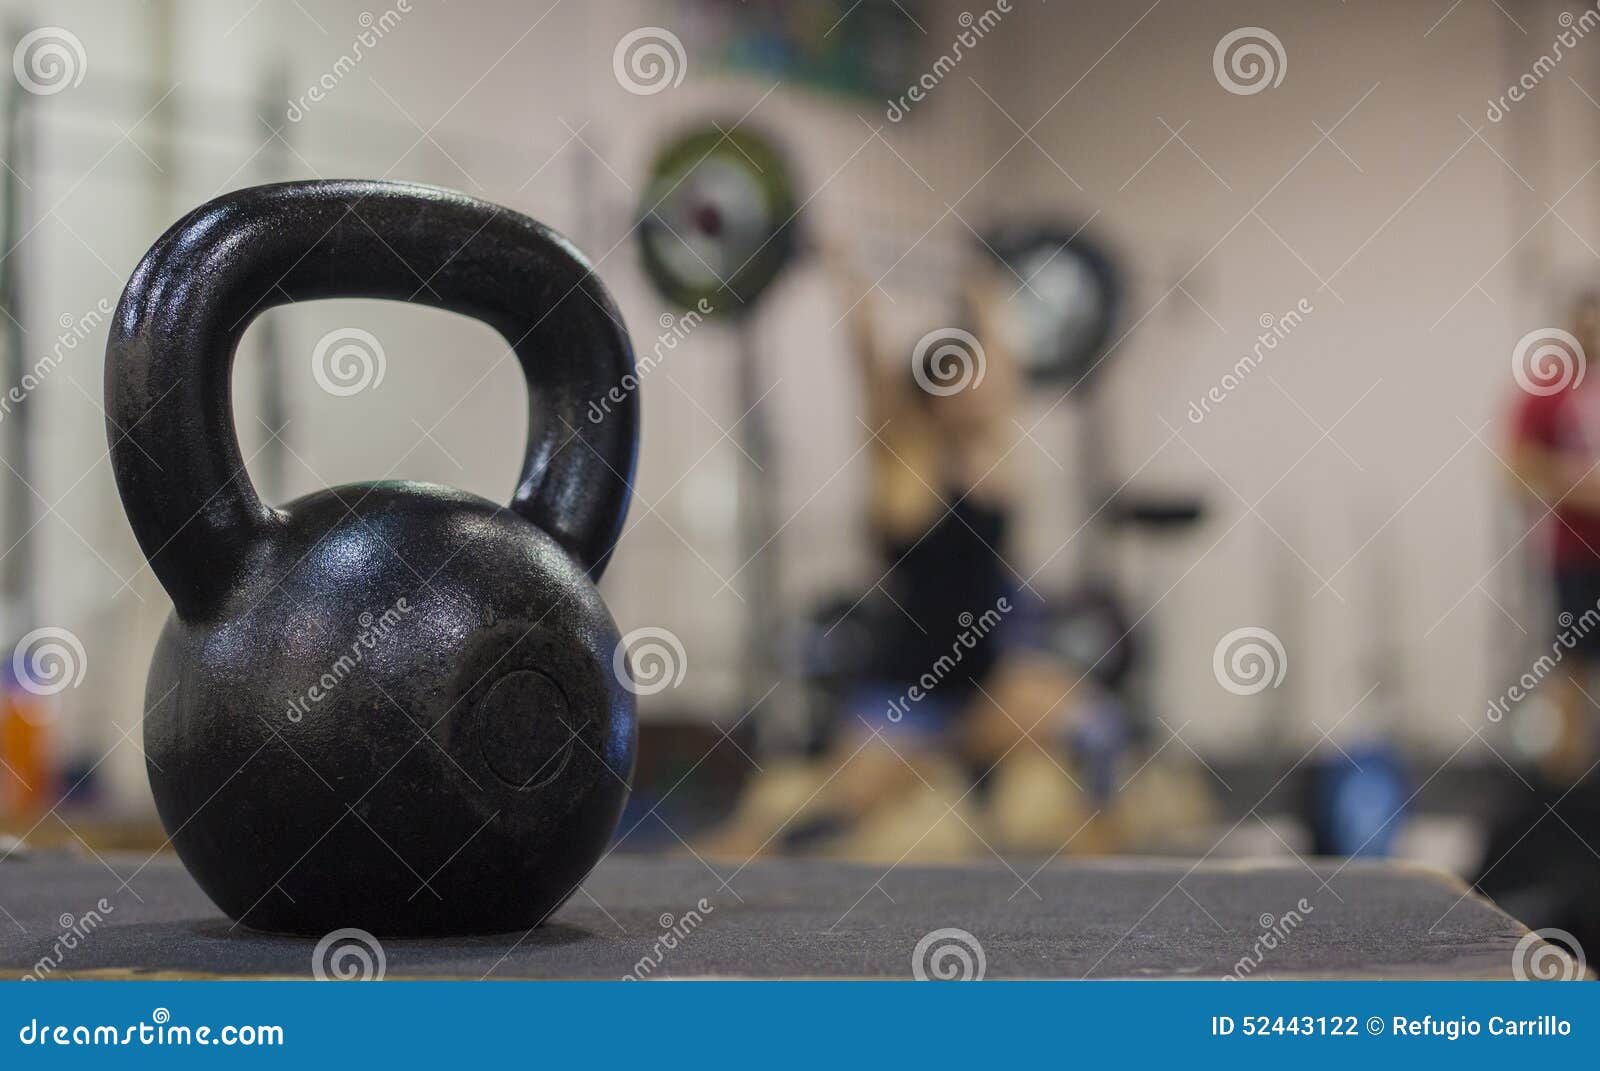 a cast iron kettle bell with a young women weight lifting in the background